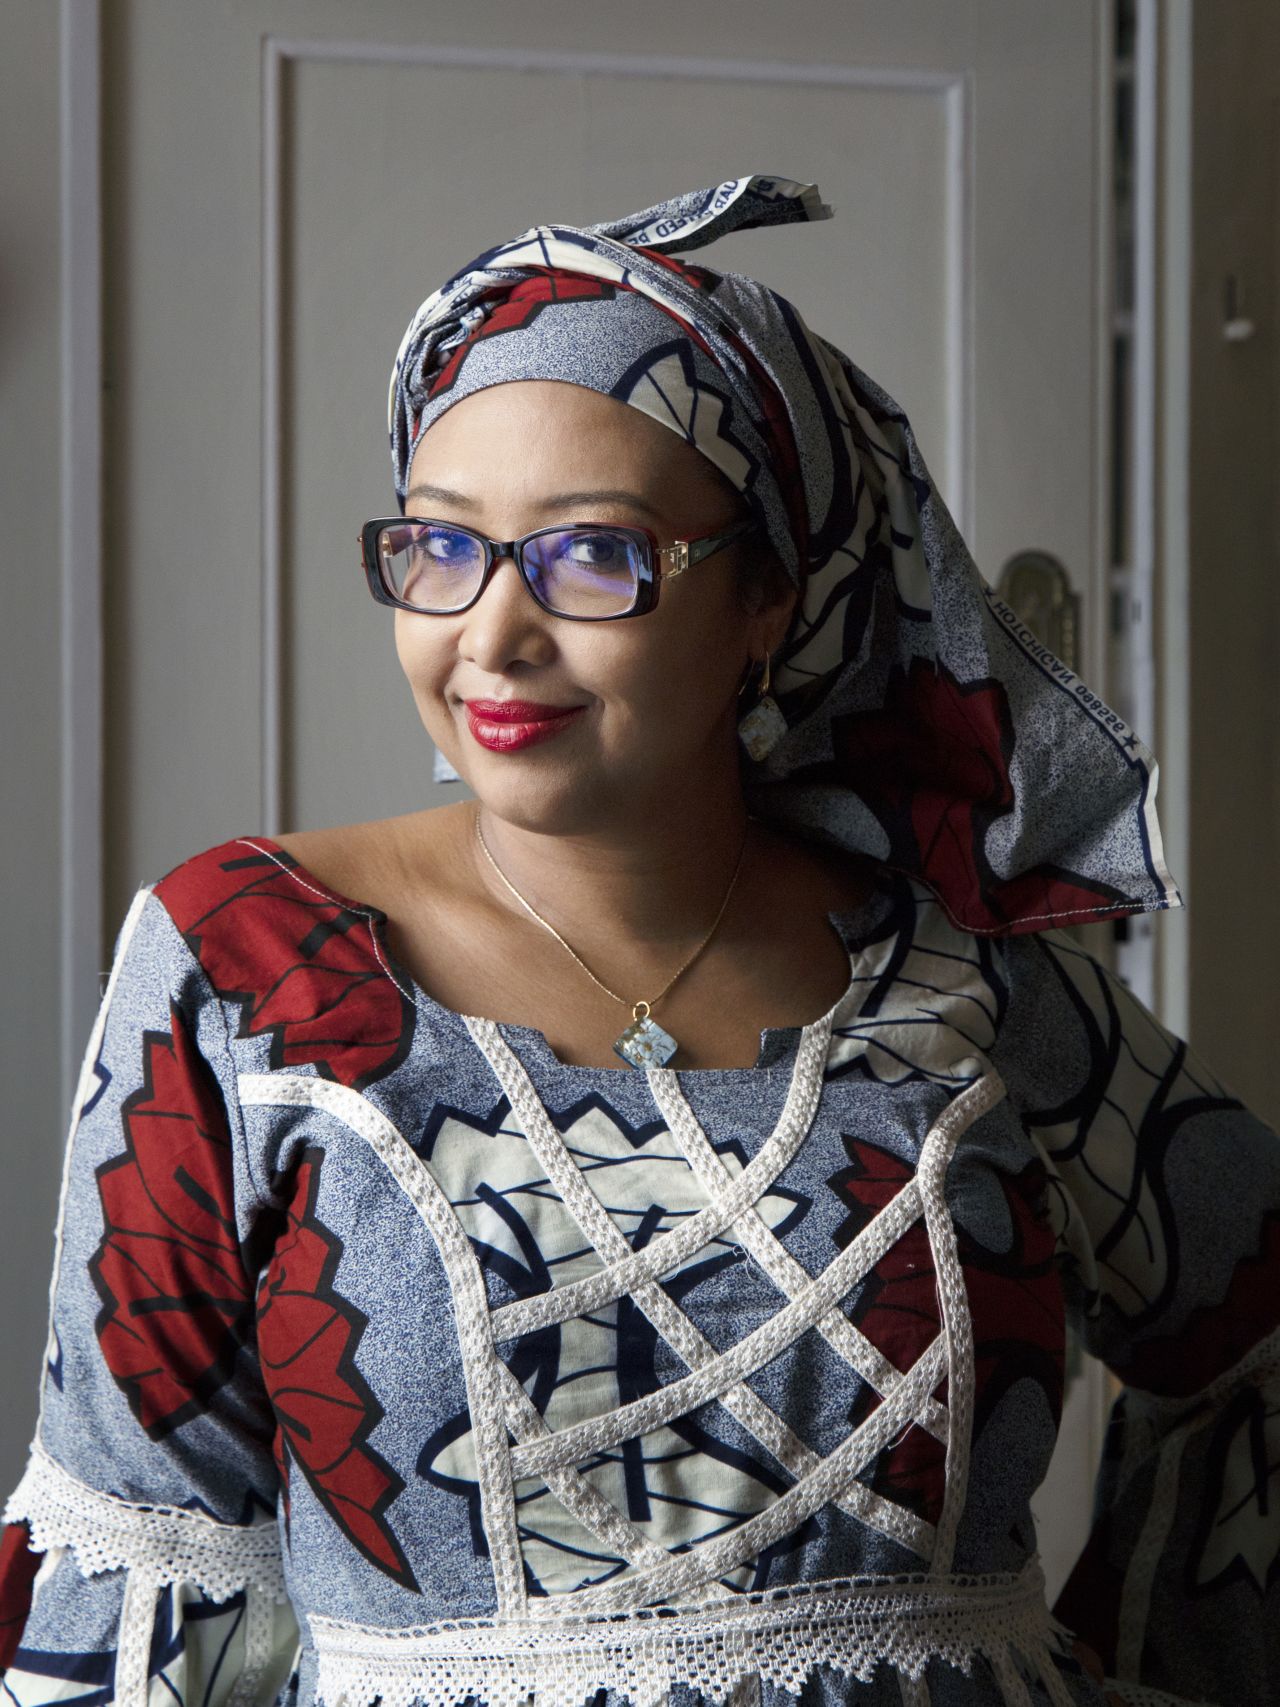 <strong>Djaili Amadou Amal</strong> is a Cameroonian activist, writer and president of the feminist collective "Femmes du Sahel," (Women of the Sahel).<br /><br />In 2019 Amal was awarded the Orange Book Prize for her novel "Les impatientes," which explores subjects including rape and polygamy as it chronicles the lives of three young women from wealthy families in Cameroon as they navigate society's expectations. A year later she won the eminent French literary award, the "Prix Goncourt des Lycéens" for the same novel. <br />